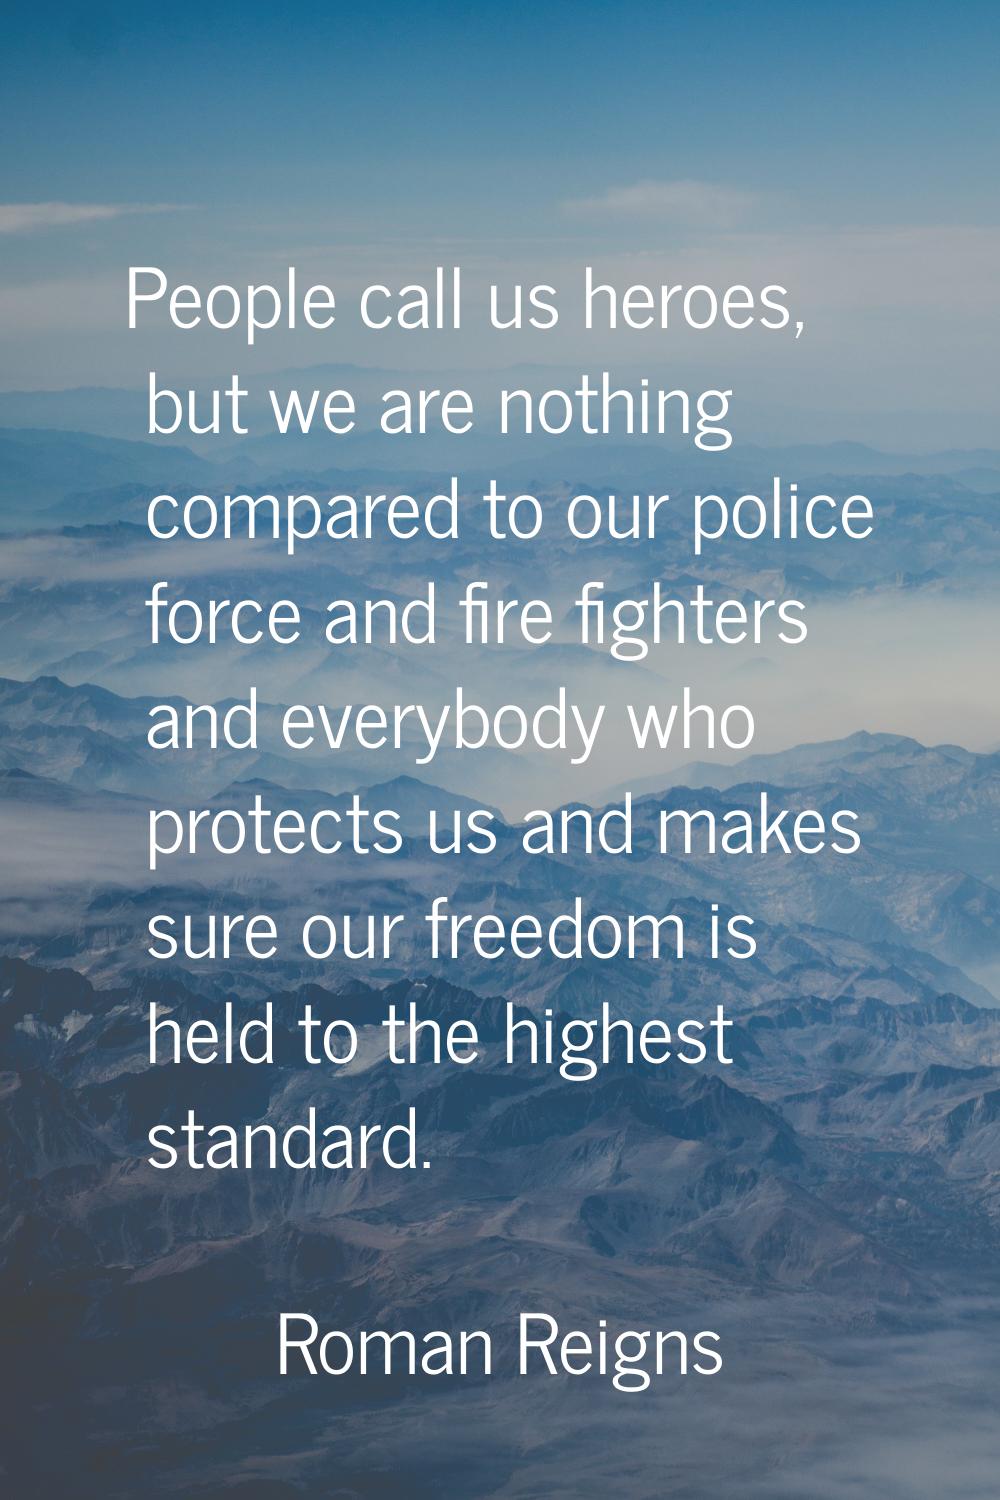 People call us heroes, but we are nothing compared to our police force and fire fighters and everyb